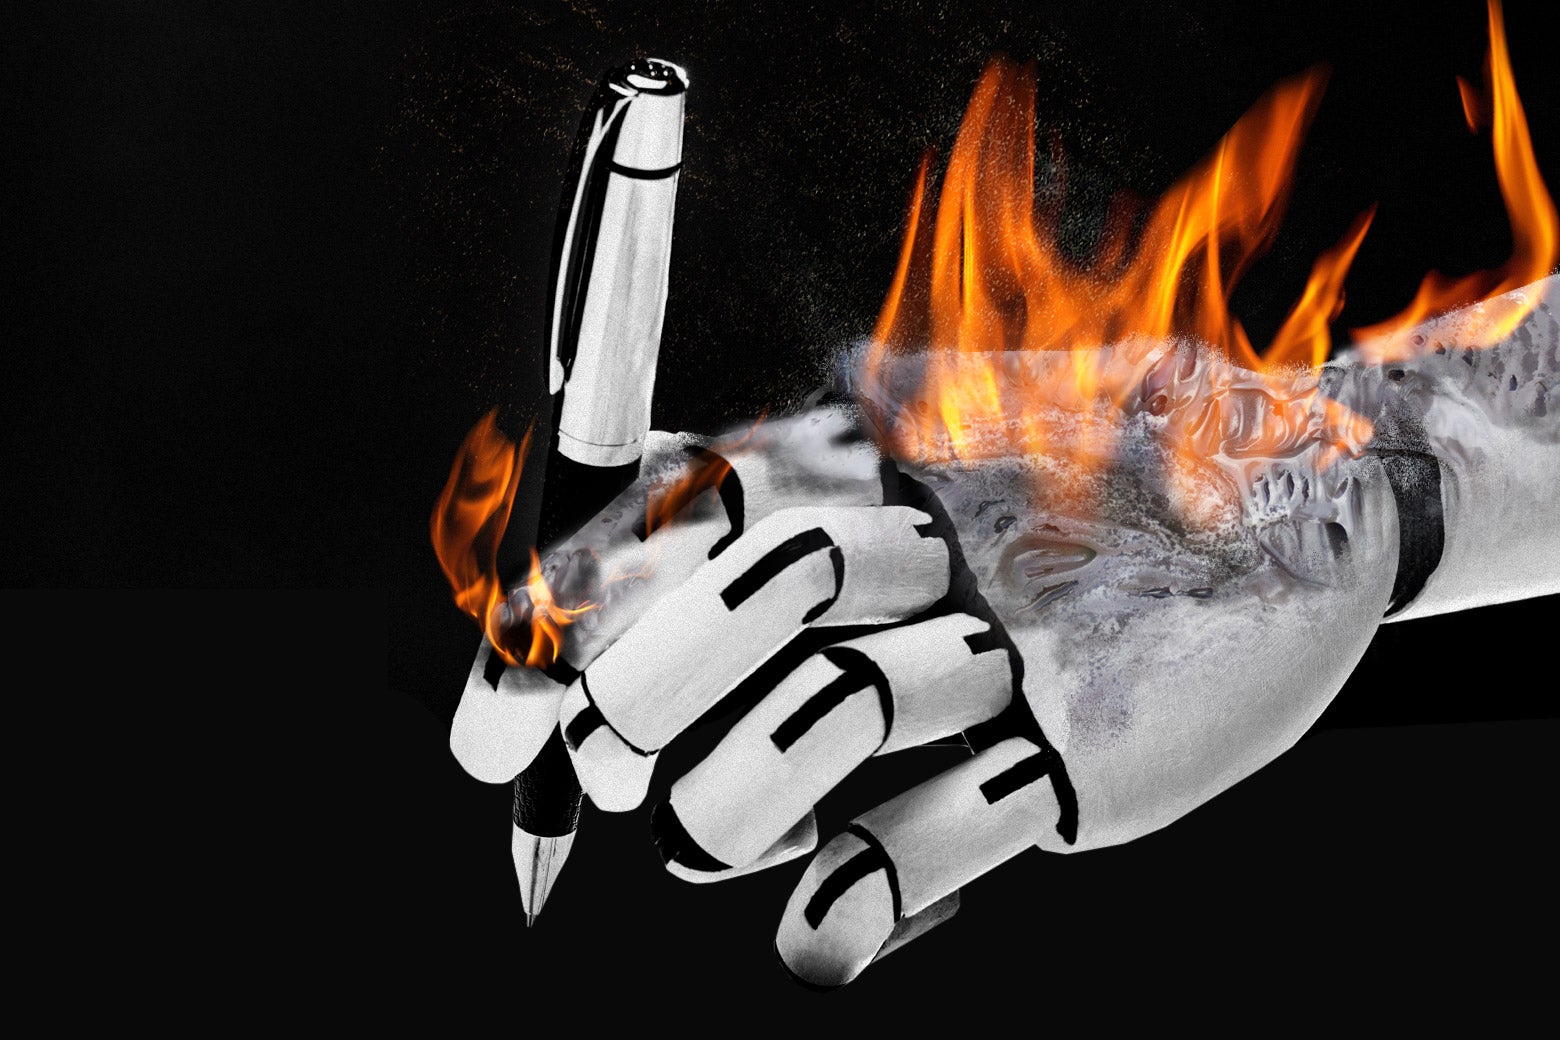 A robot hand holding a pen as it goes down in flames.